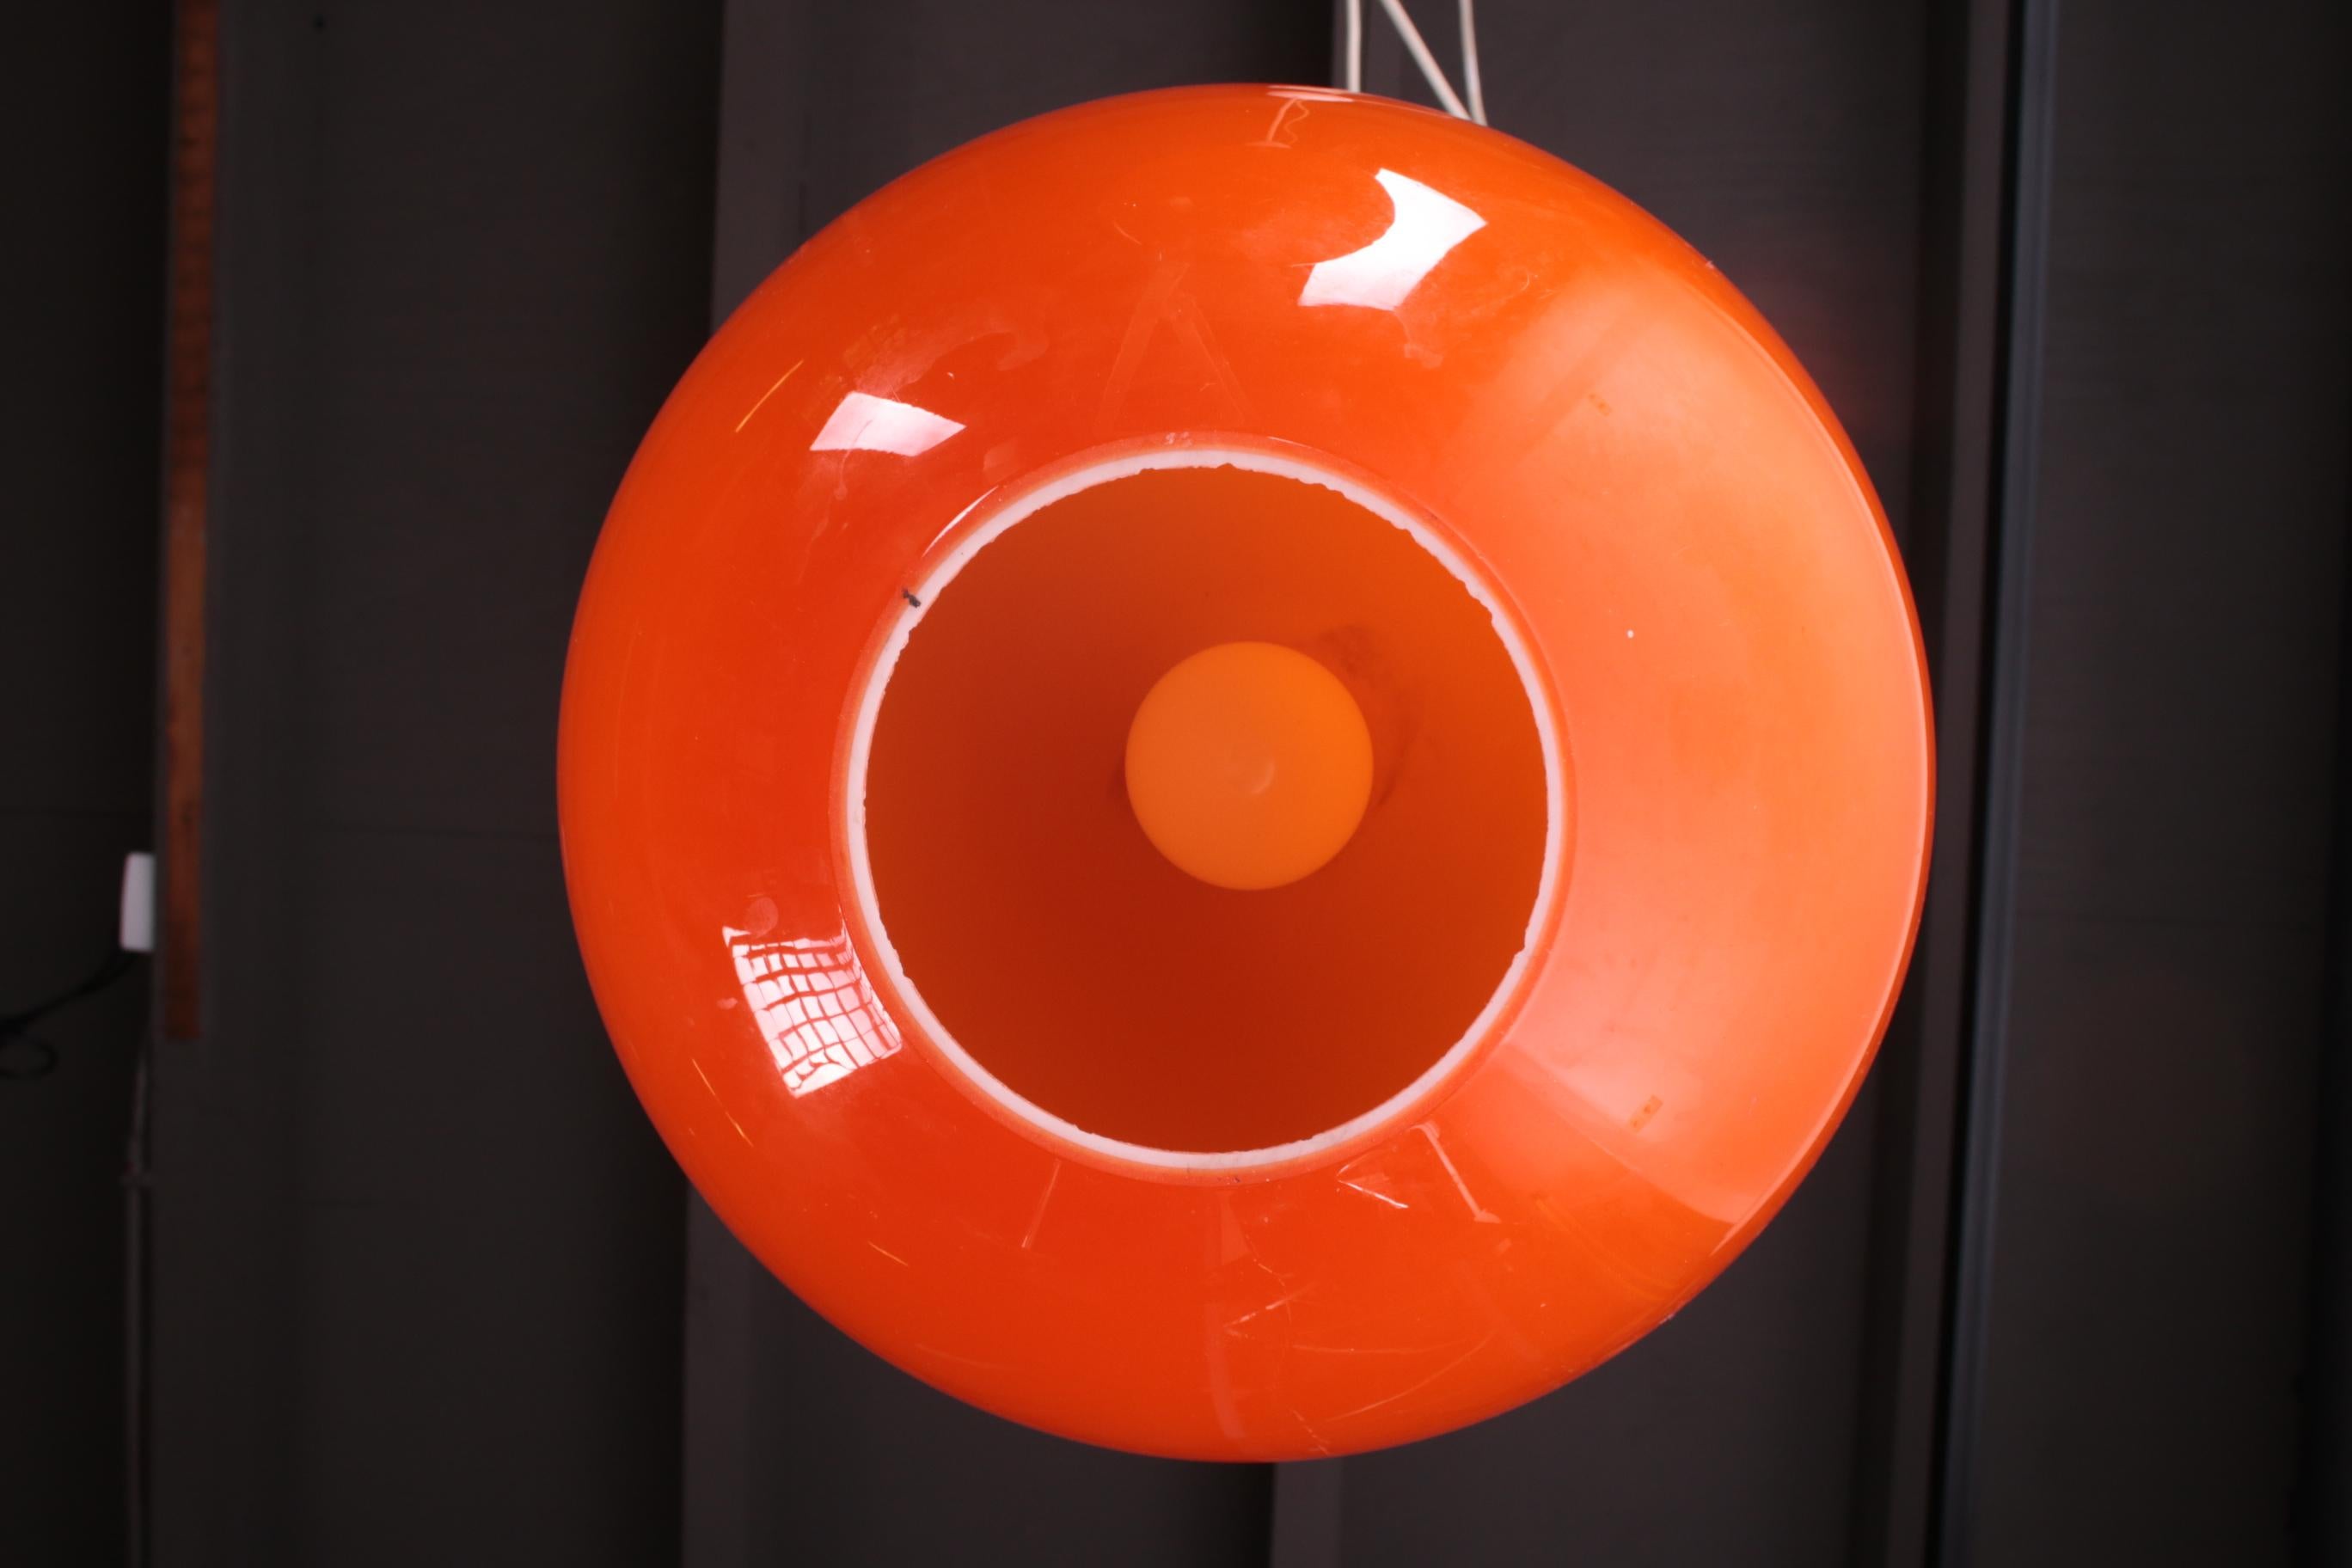 Beautiful orange hanging lamp, this model is also called Ui. (The shape of an Onion). These lamps are mouth blown and this is also called Murano glass. The inside is always white. This lamp unfortunately no longer has stickers of